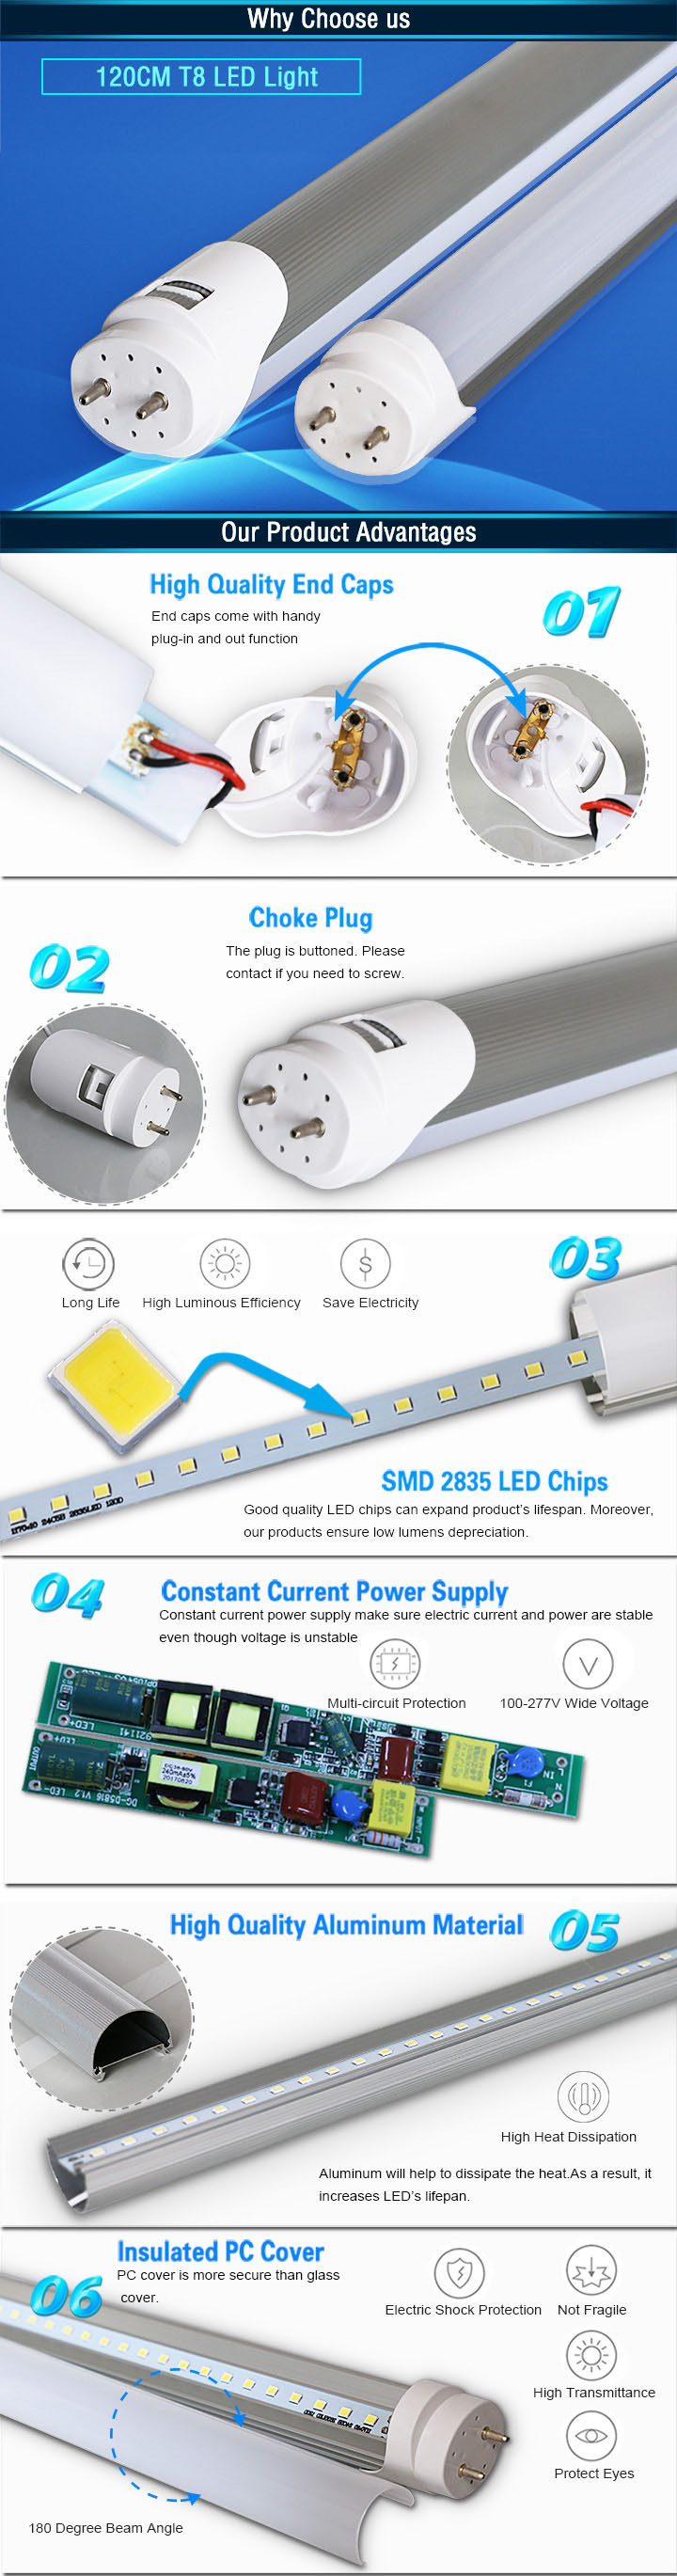 2800-6500K 2200-2400lm 1200mm 18W (40W Fluorescent Replacement) 3 Years Warranty T8 LED Light Tube Lamp